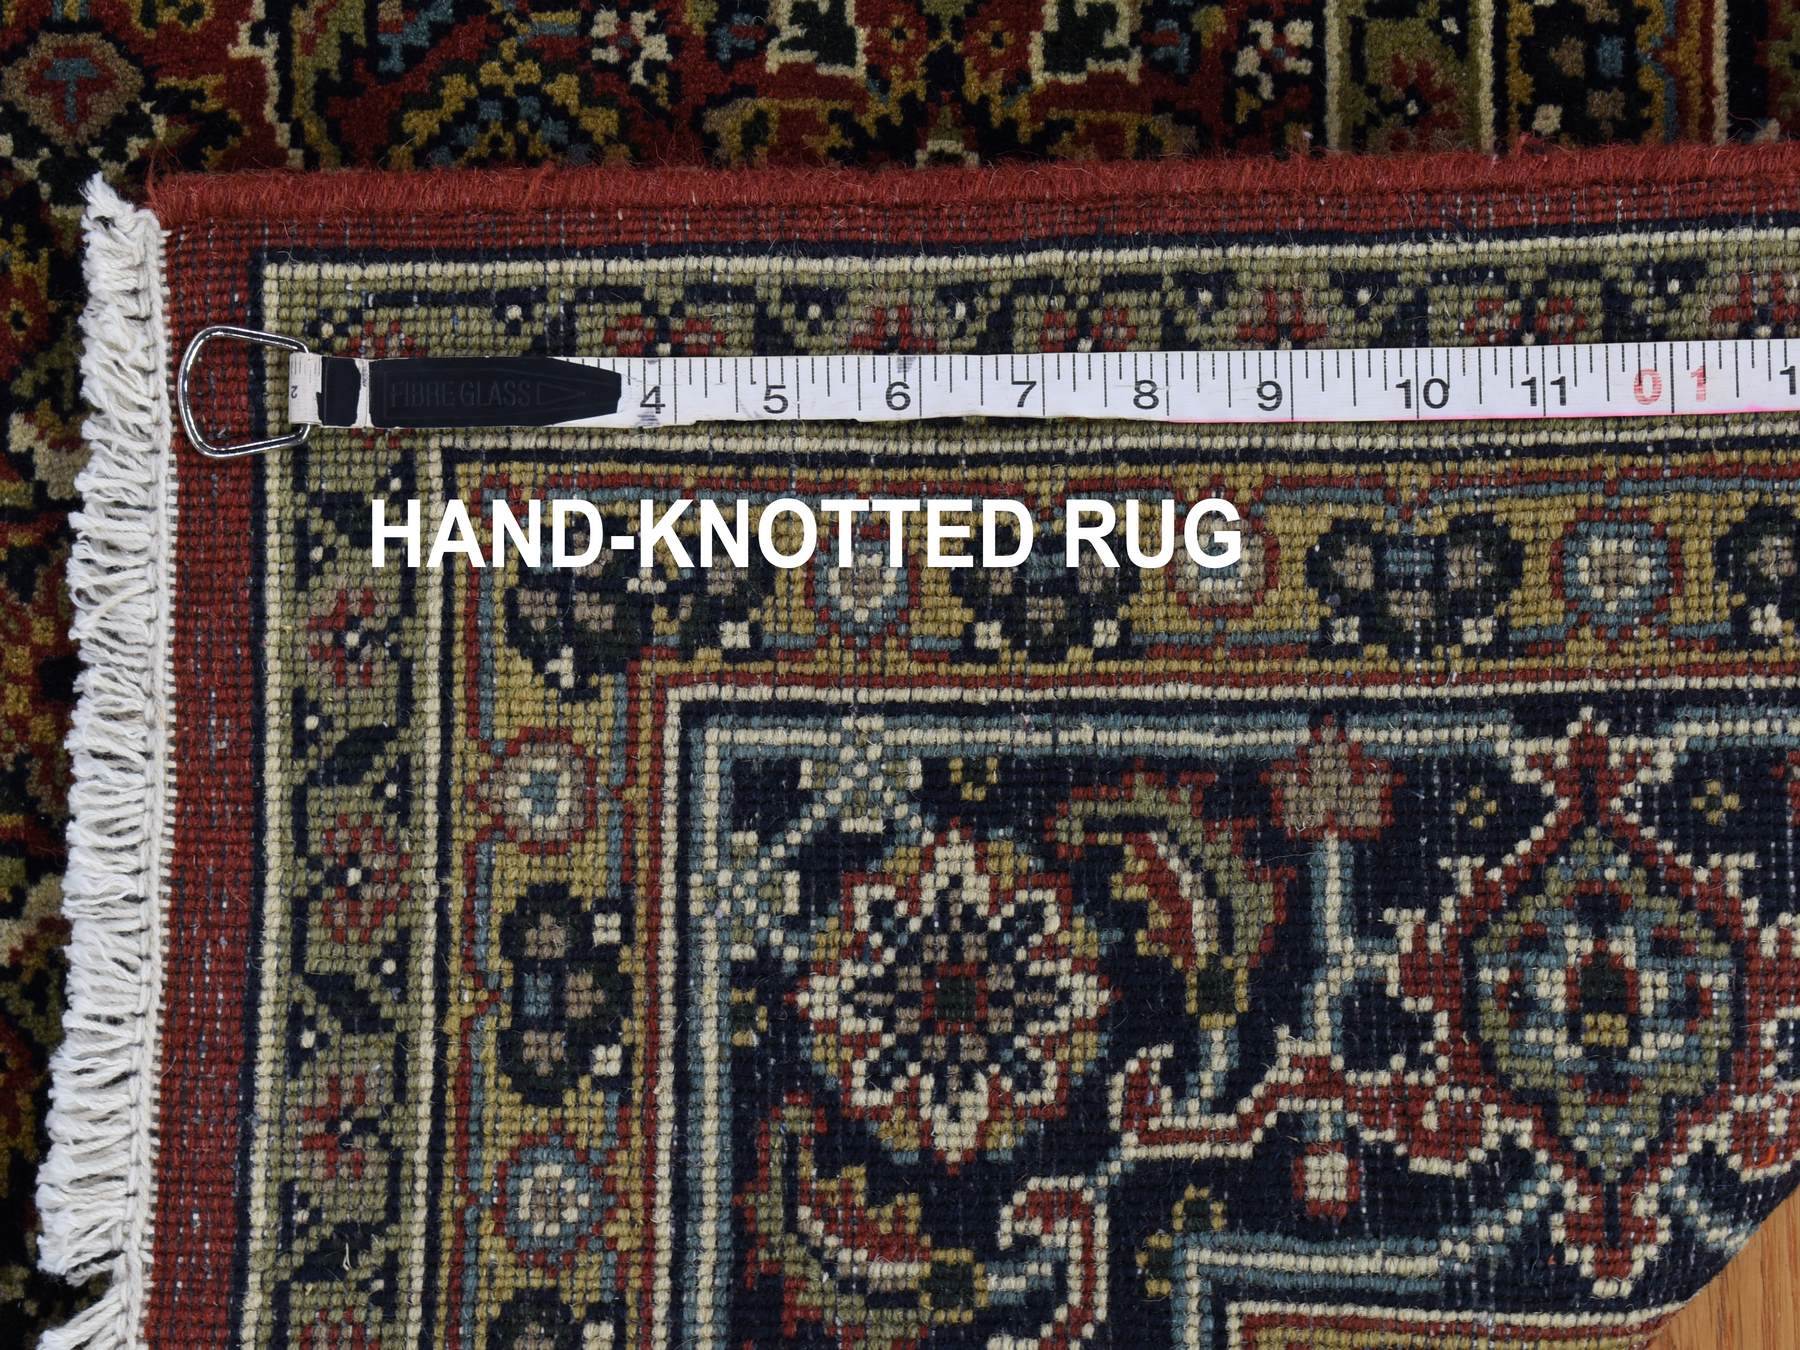 Traditional Rugs LUV720108